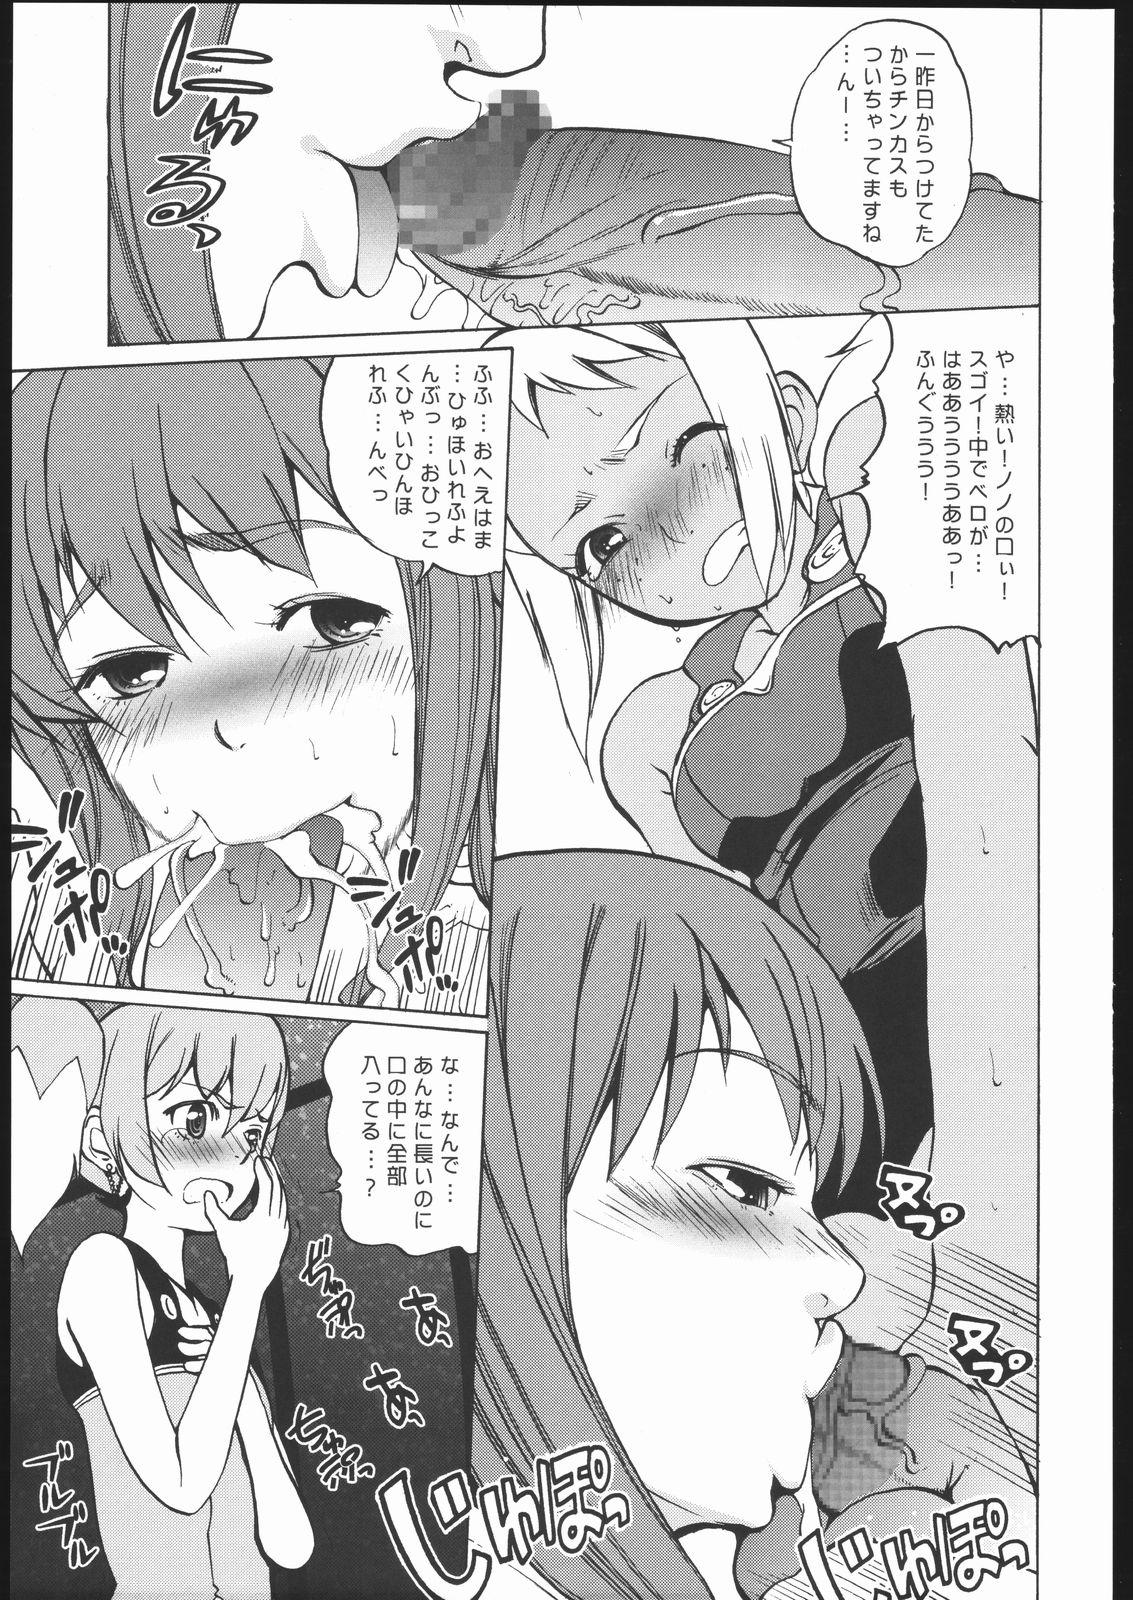 Liveshow NA・ZE・NA・RA・BA! - Diebuster Reversecowgirl - Page 8